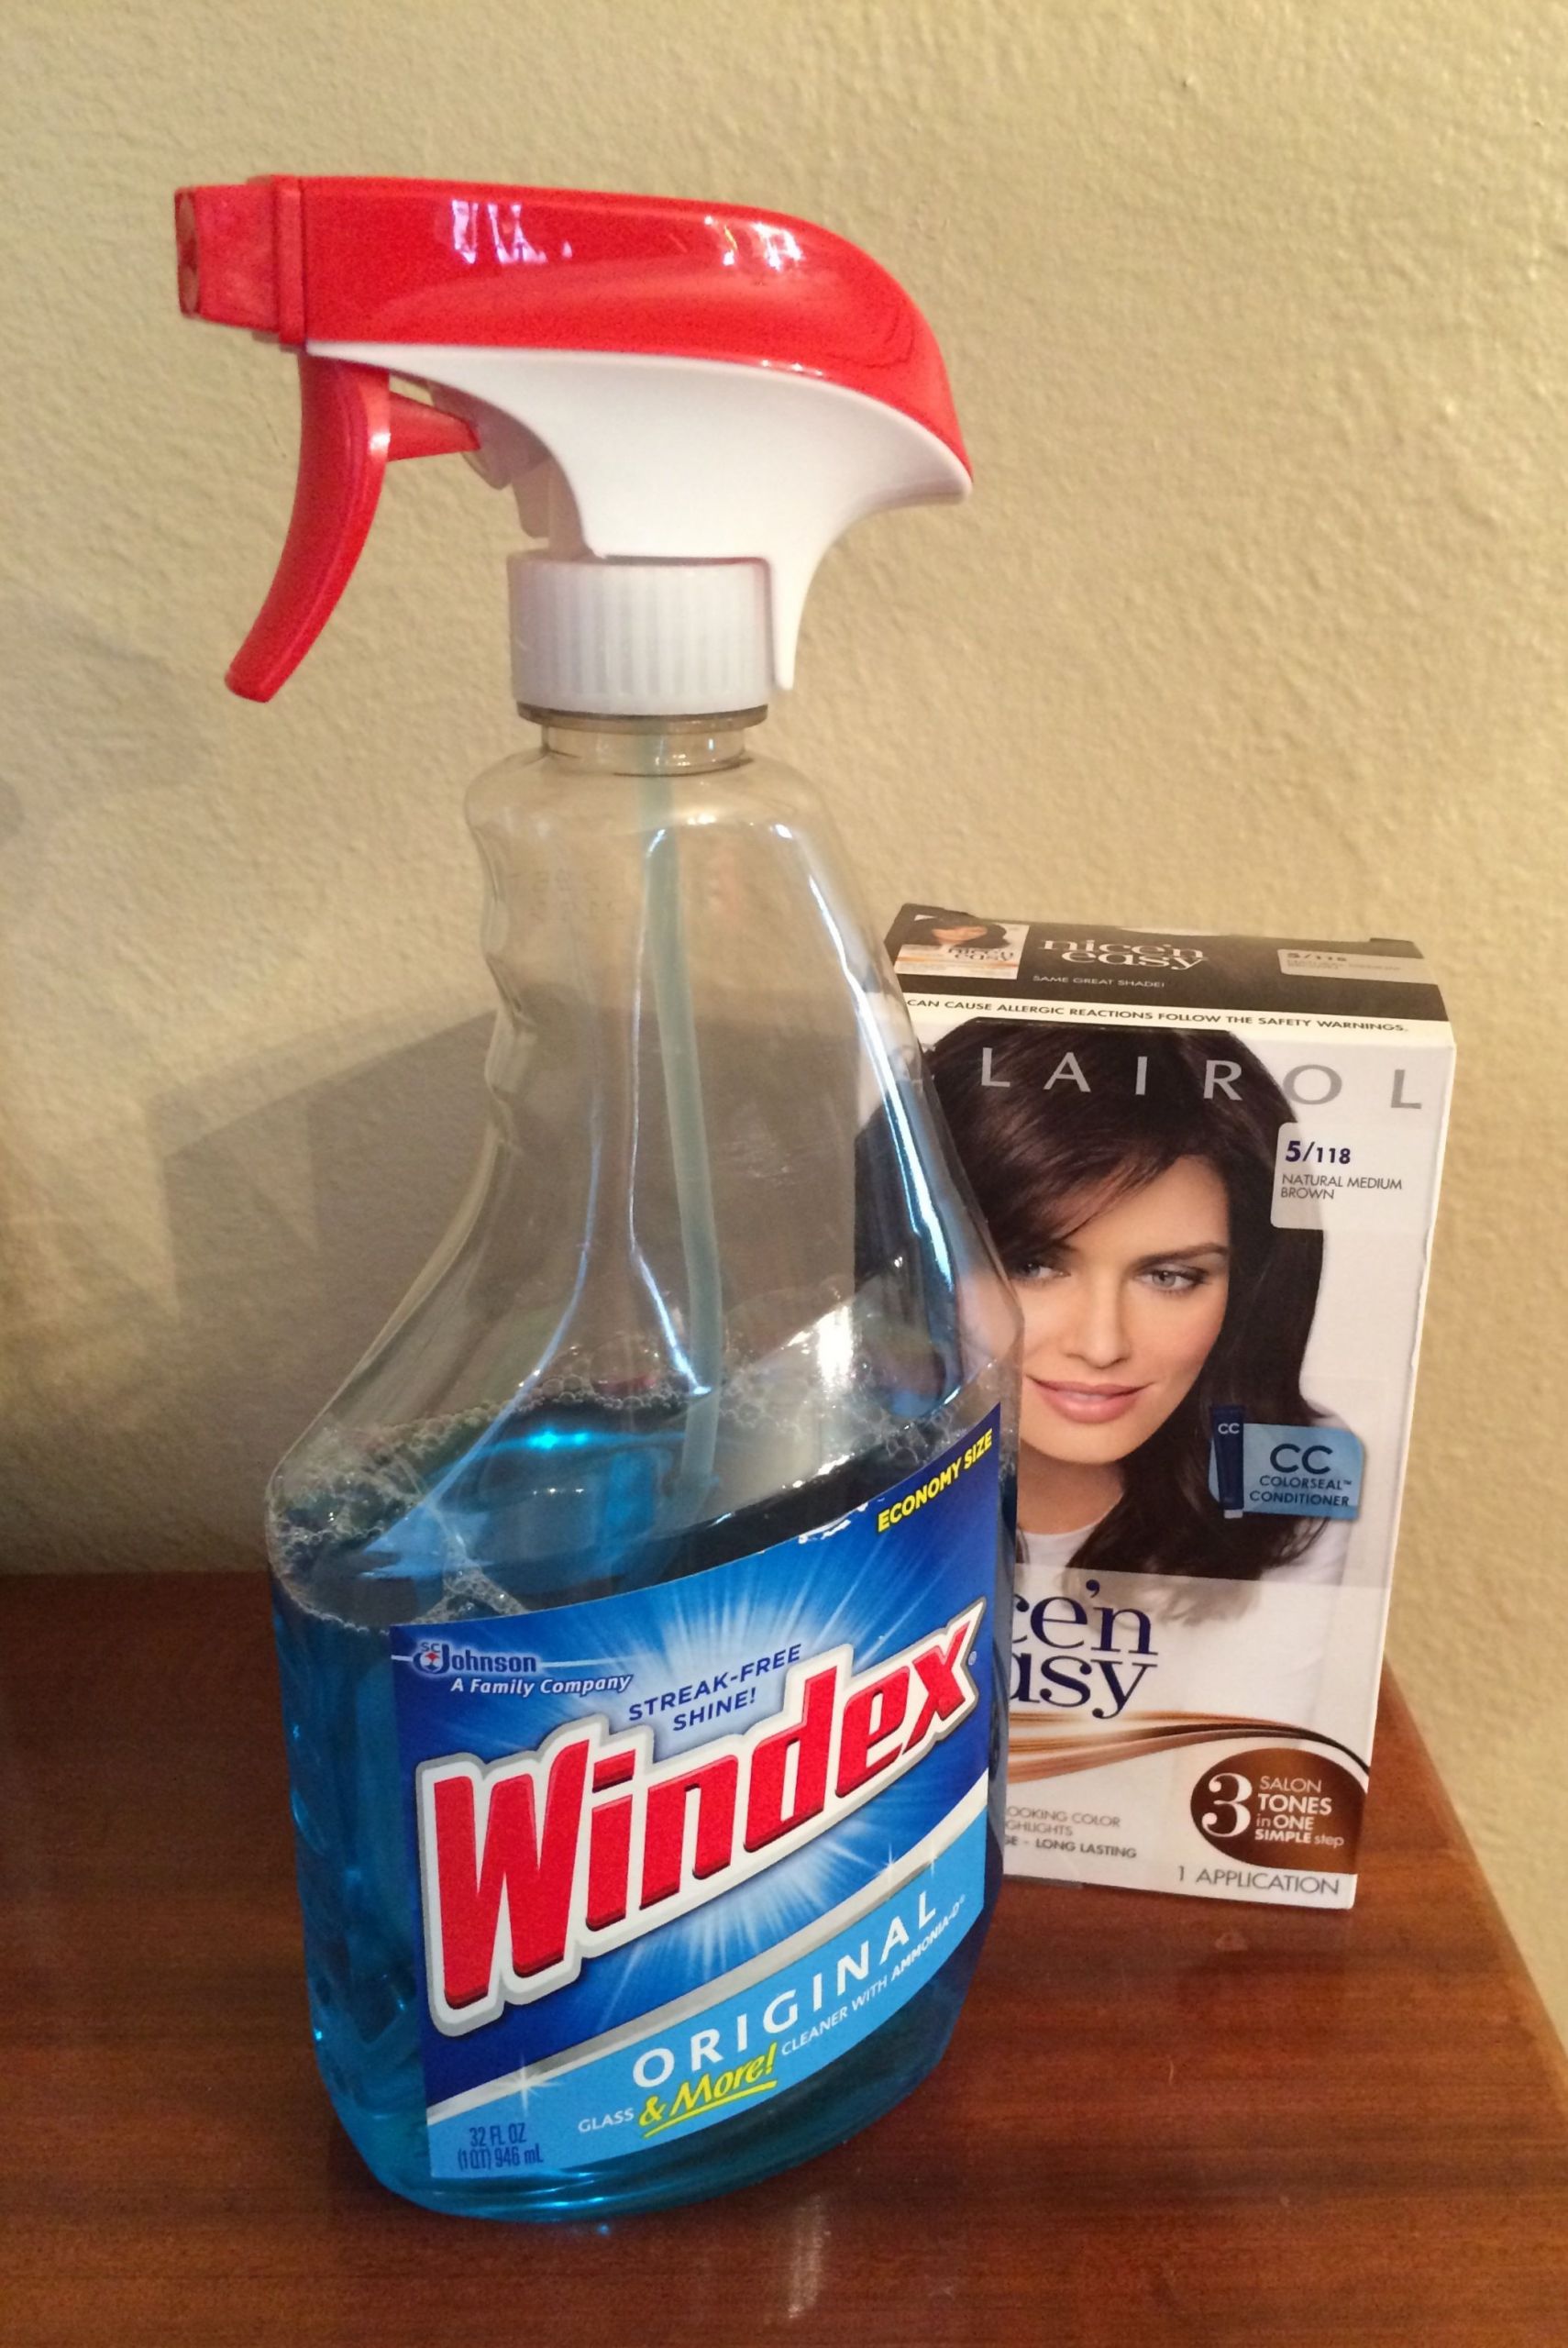 Hair Color Remover DIY
 My hair stylist told me you can use Windex on a cotton pad